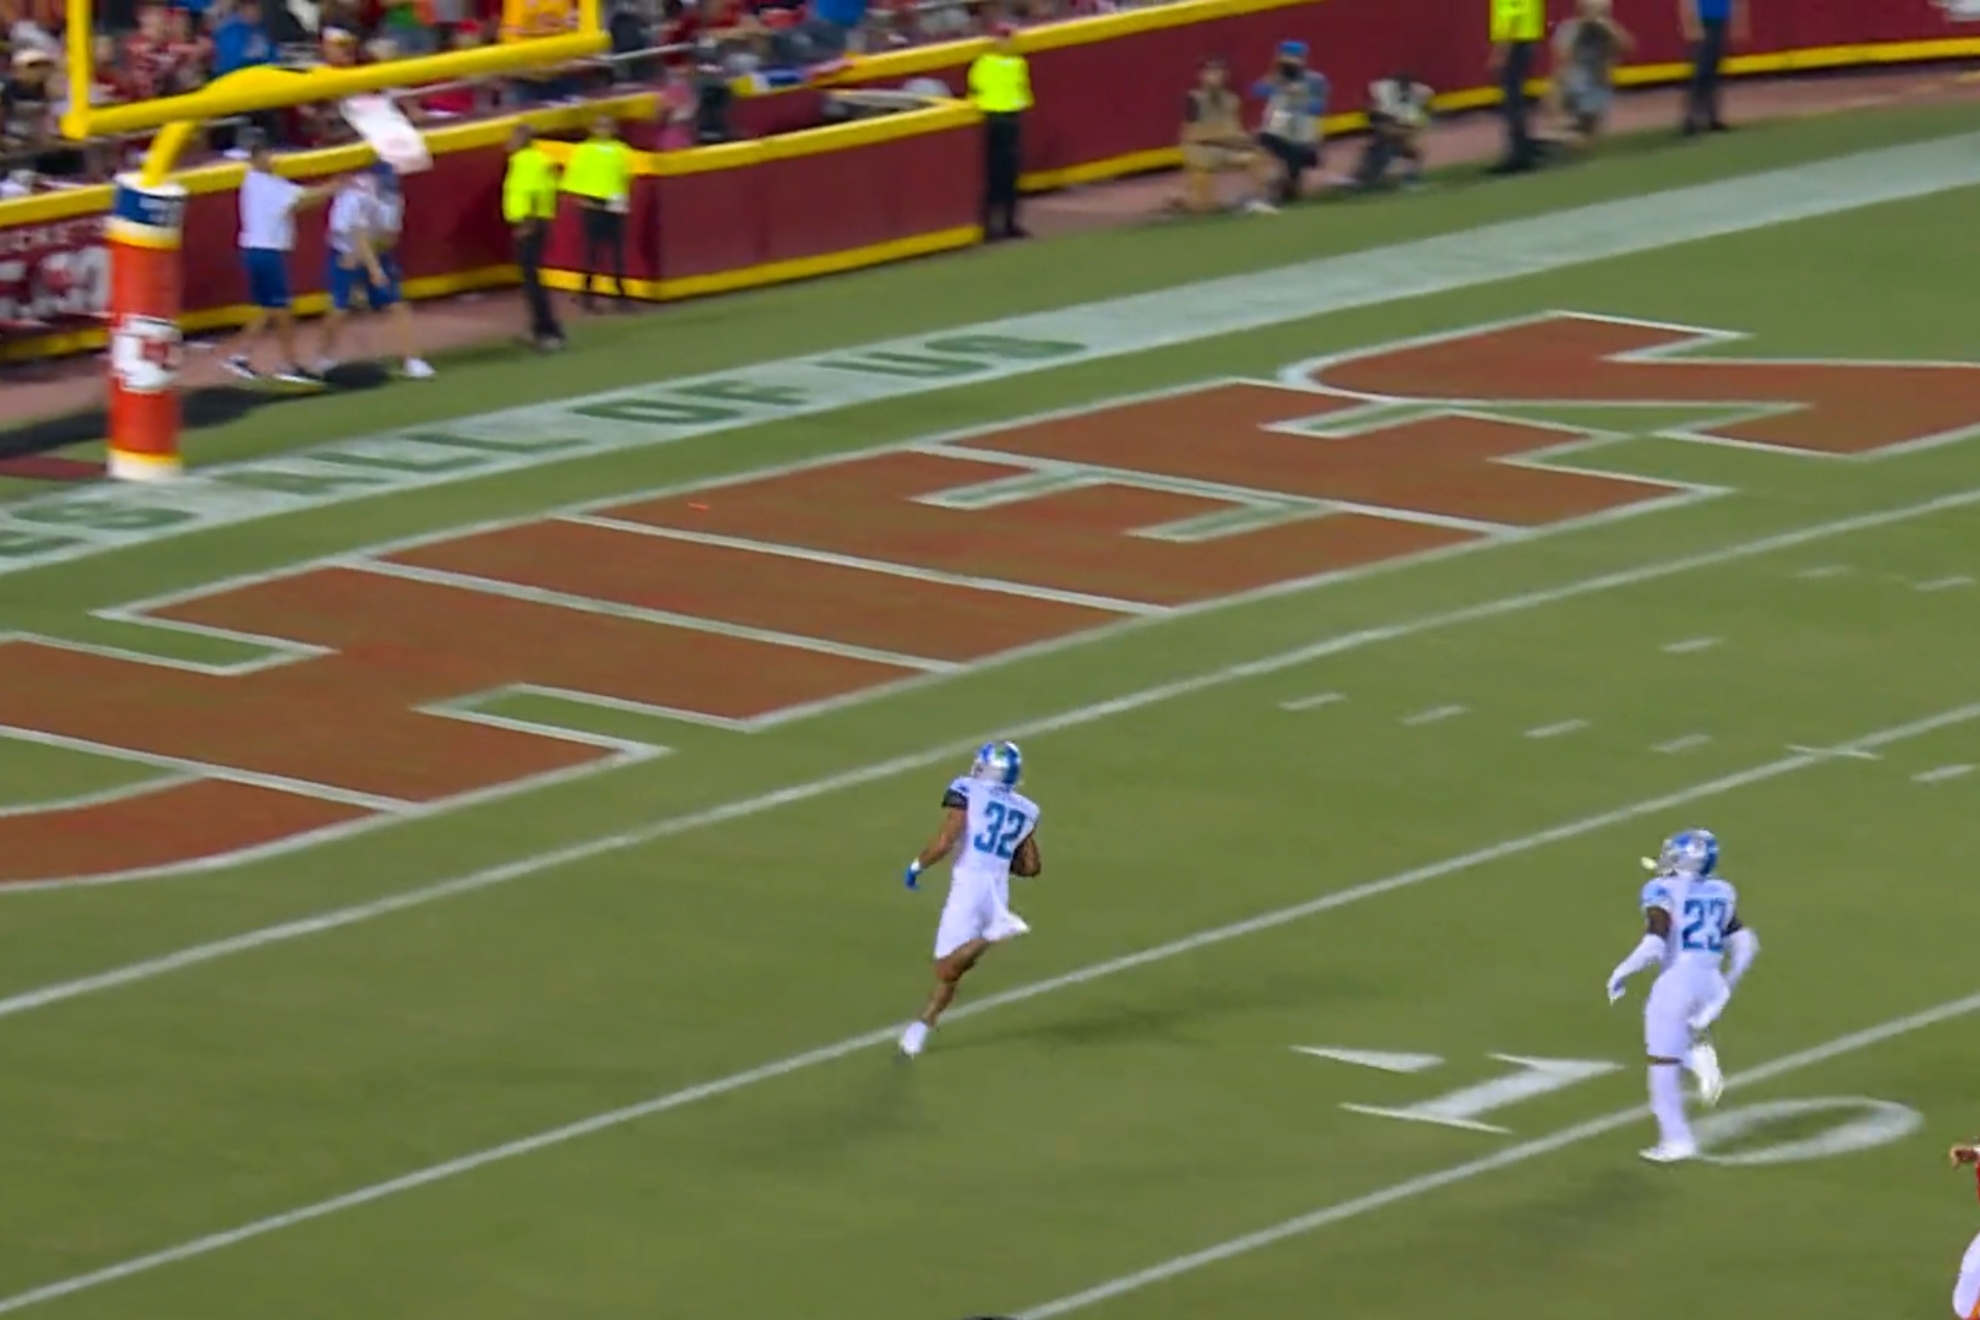 Brian Branch tied the game for the Lions after the interception